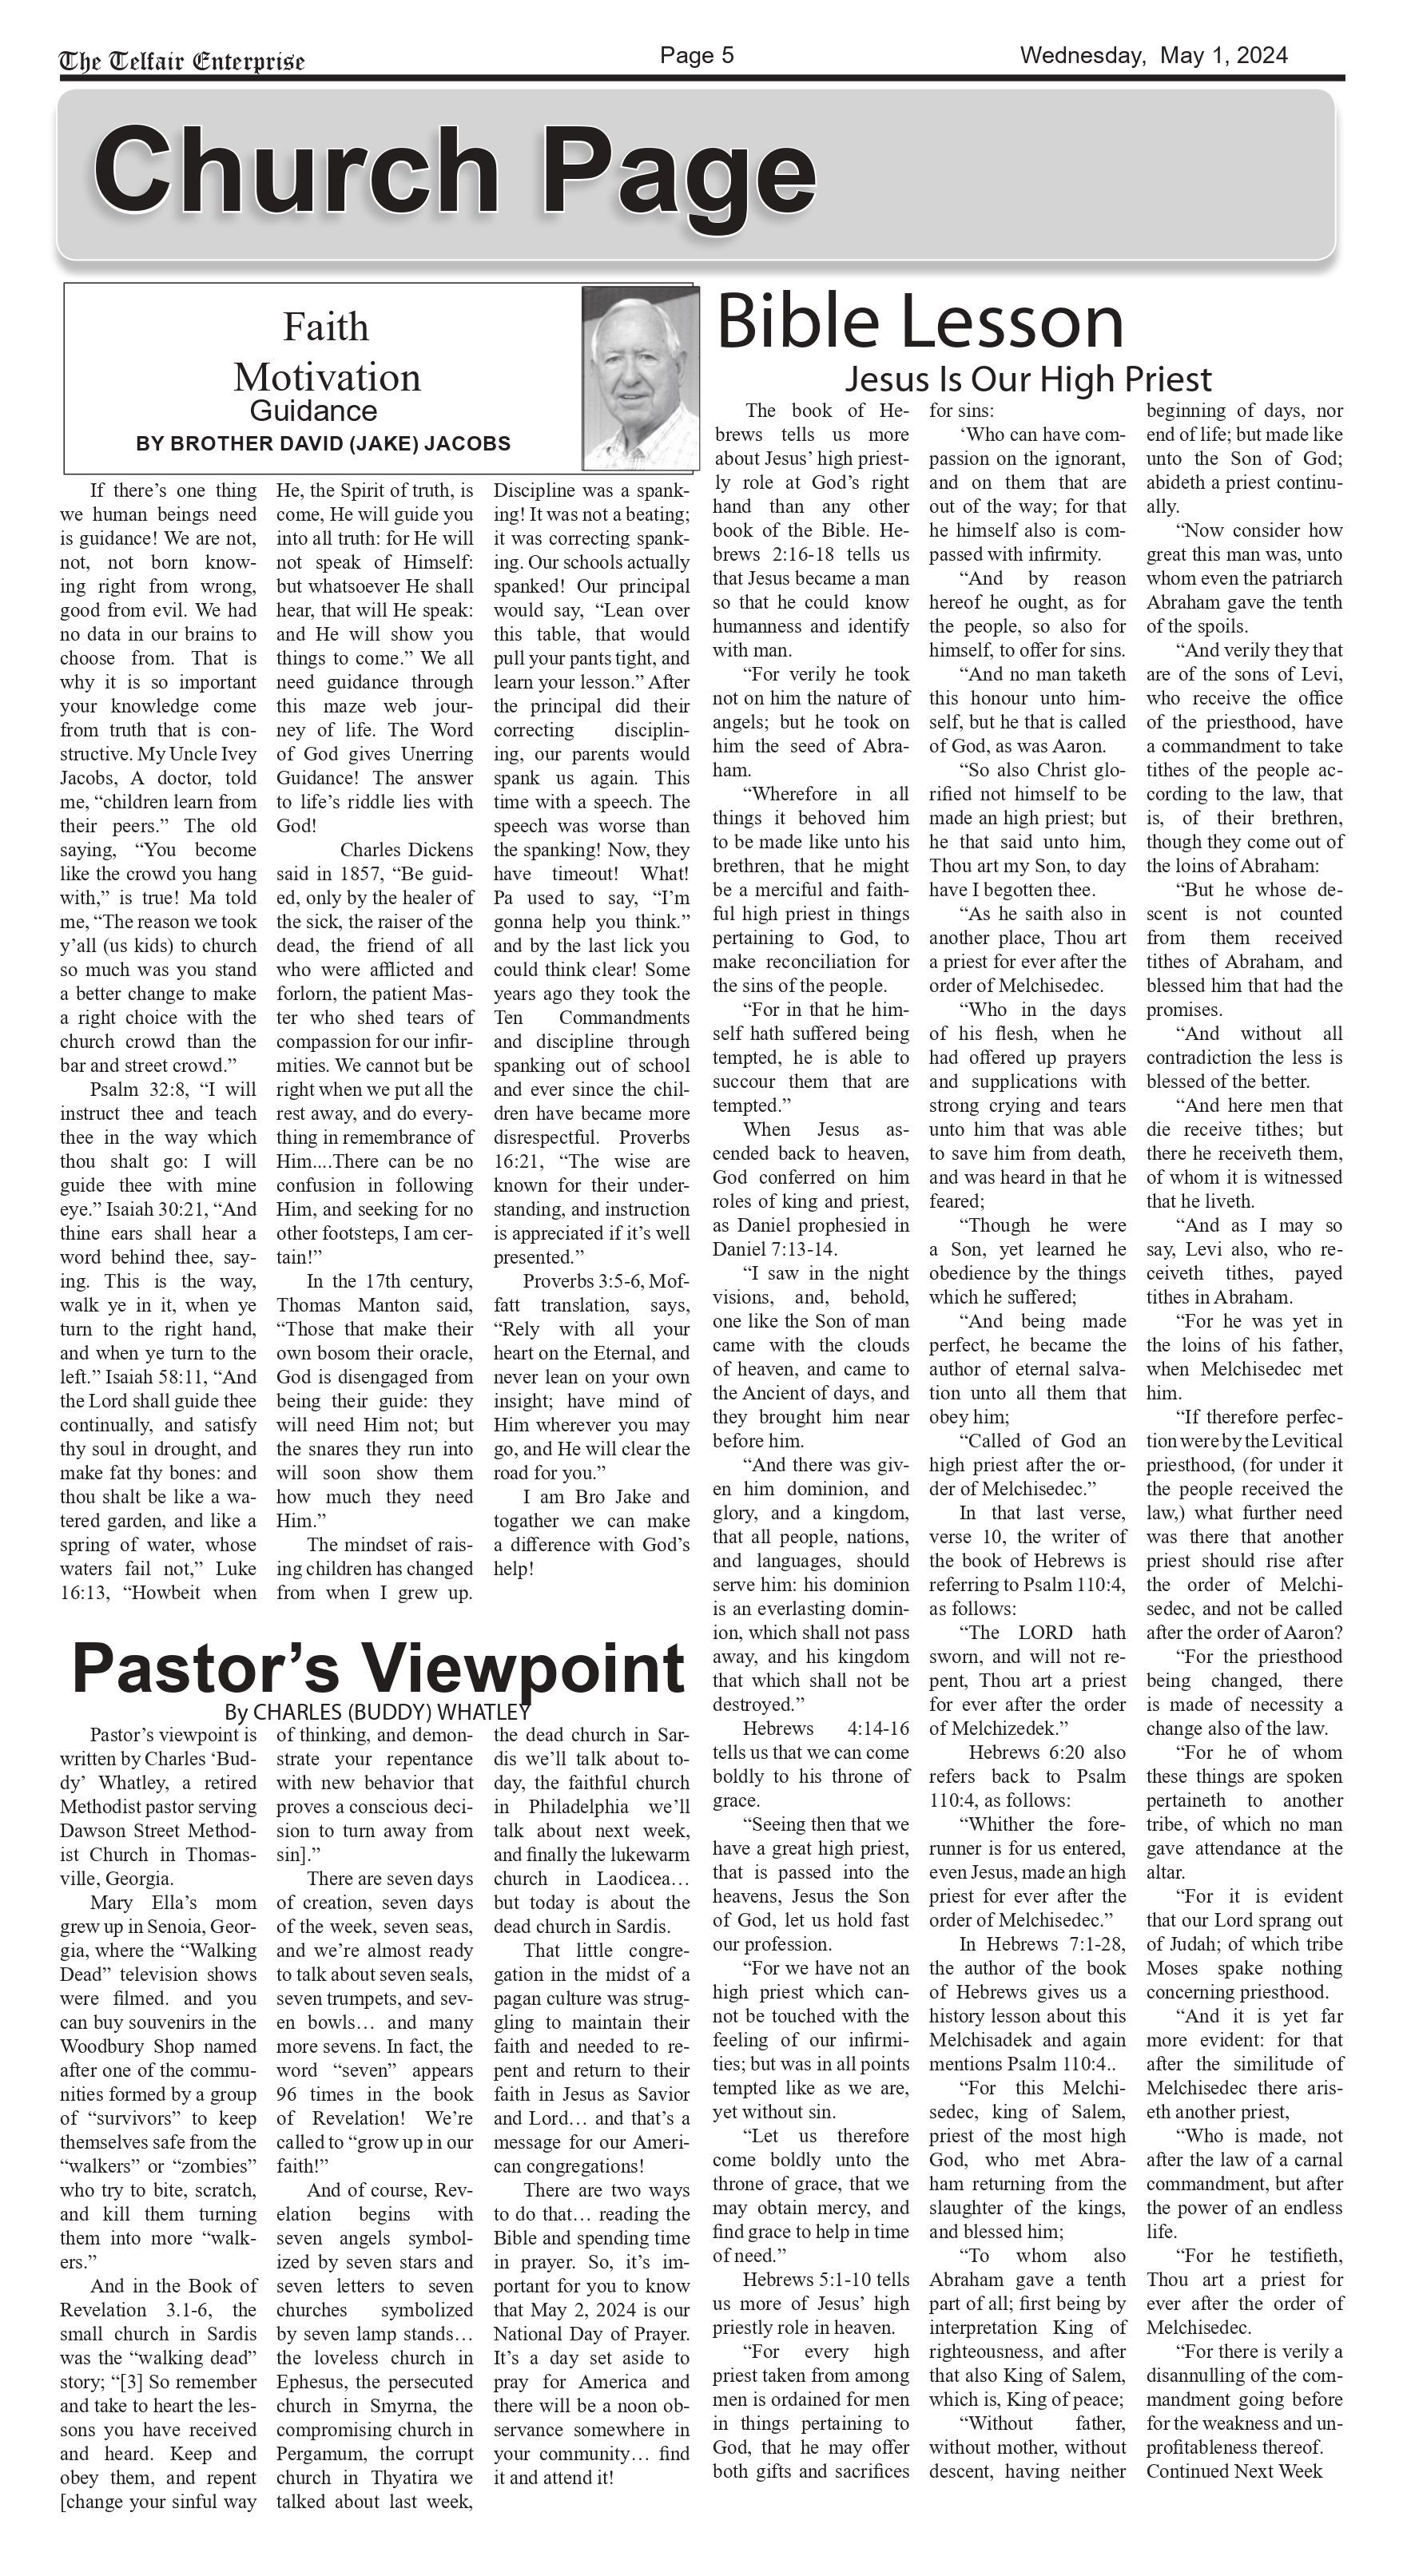 A church page with a bible lesson and pastor 's viewpoint